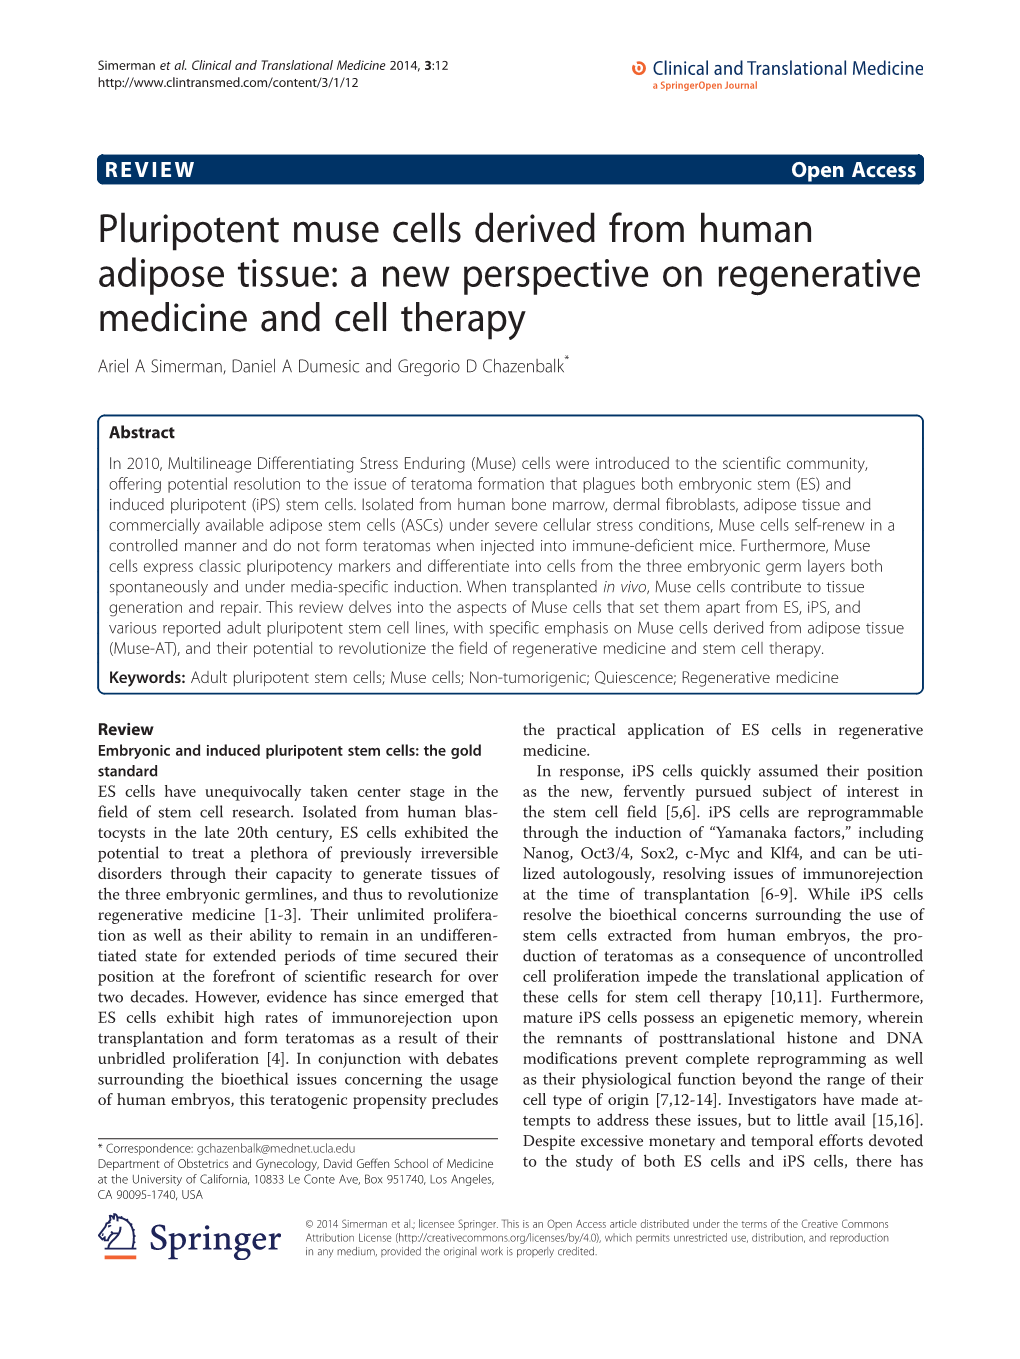 Pluripotent Muse Cells Derived from Human Adipose Tissue